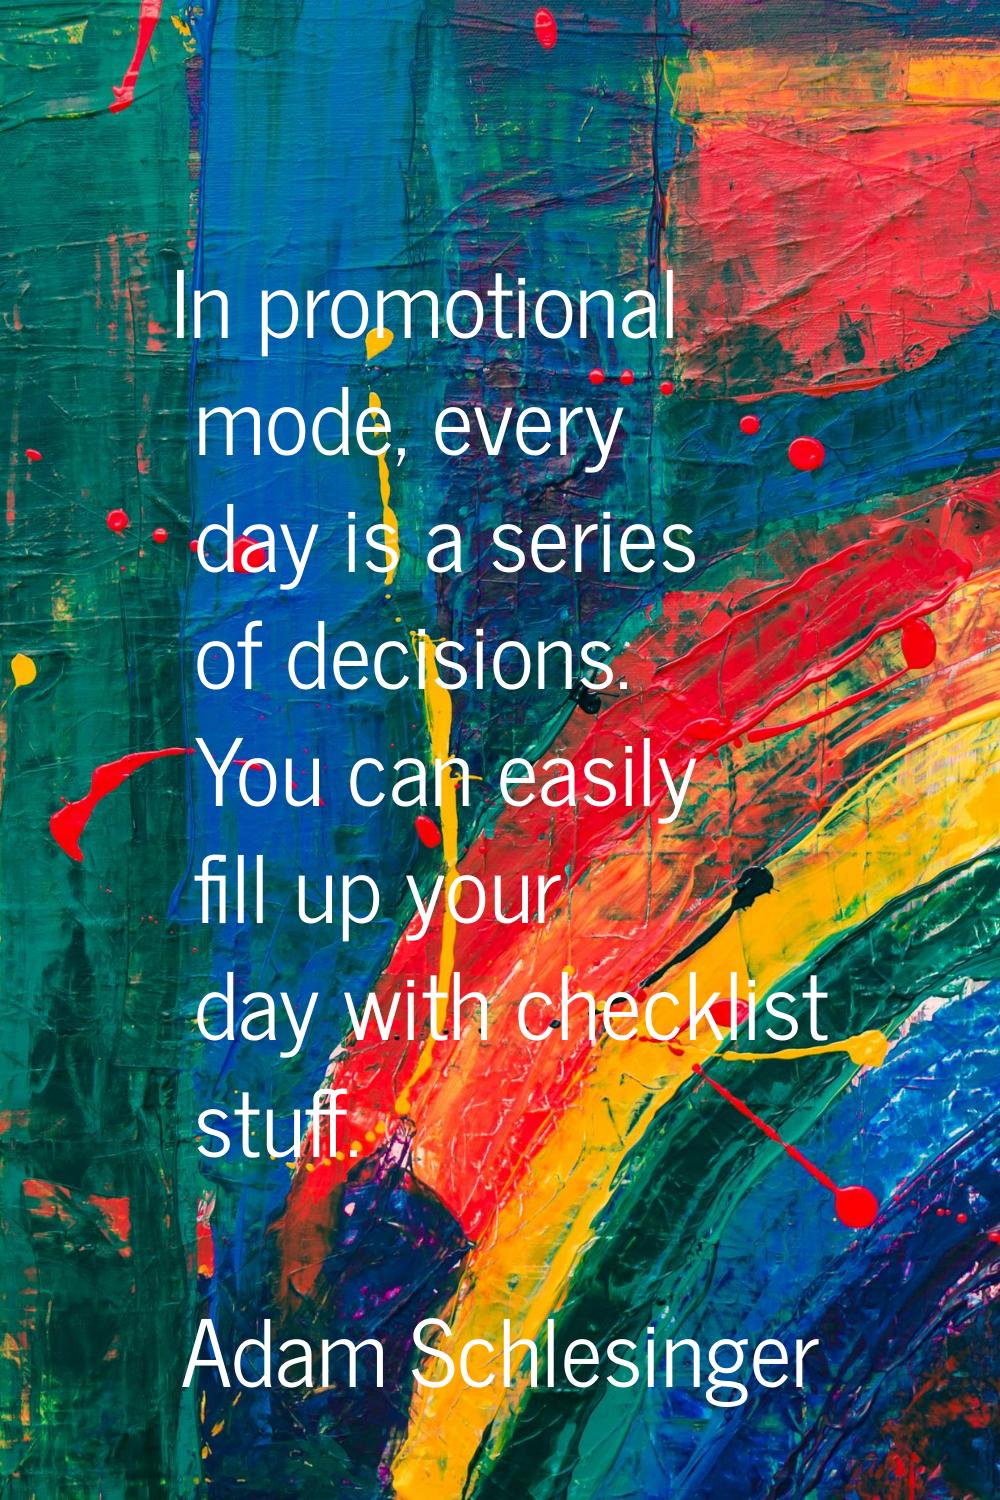 In promotional mode, every day is a series of decisions. You can easily fill up your day with check